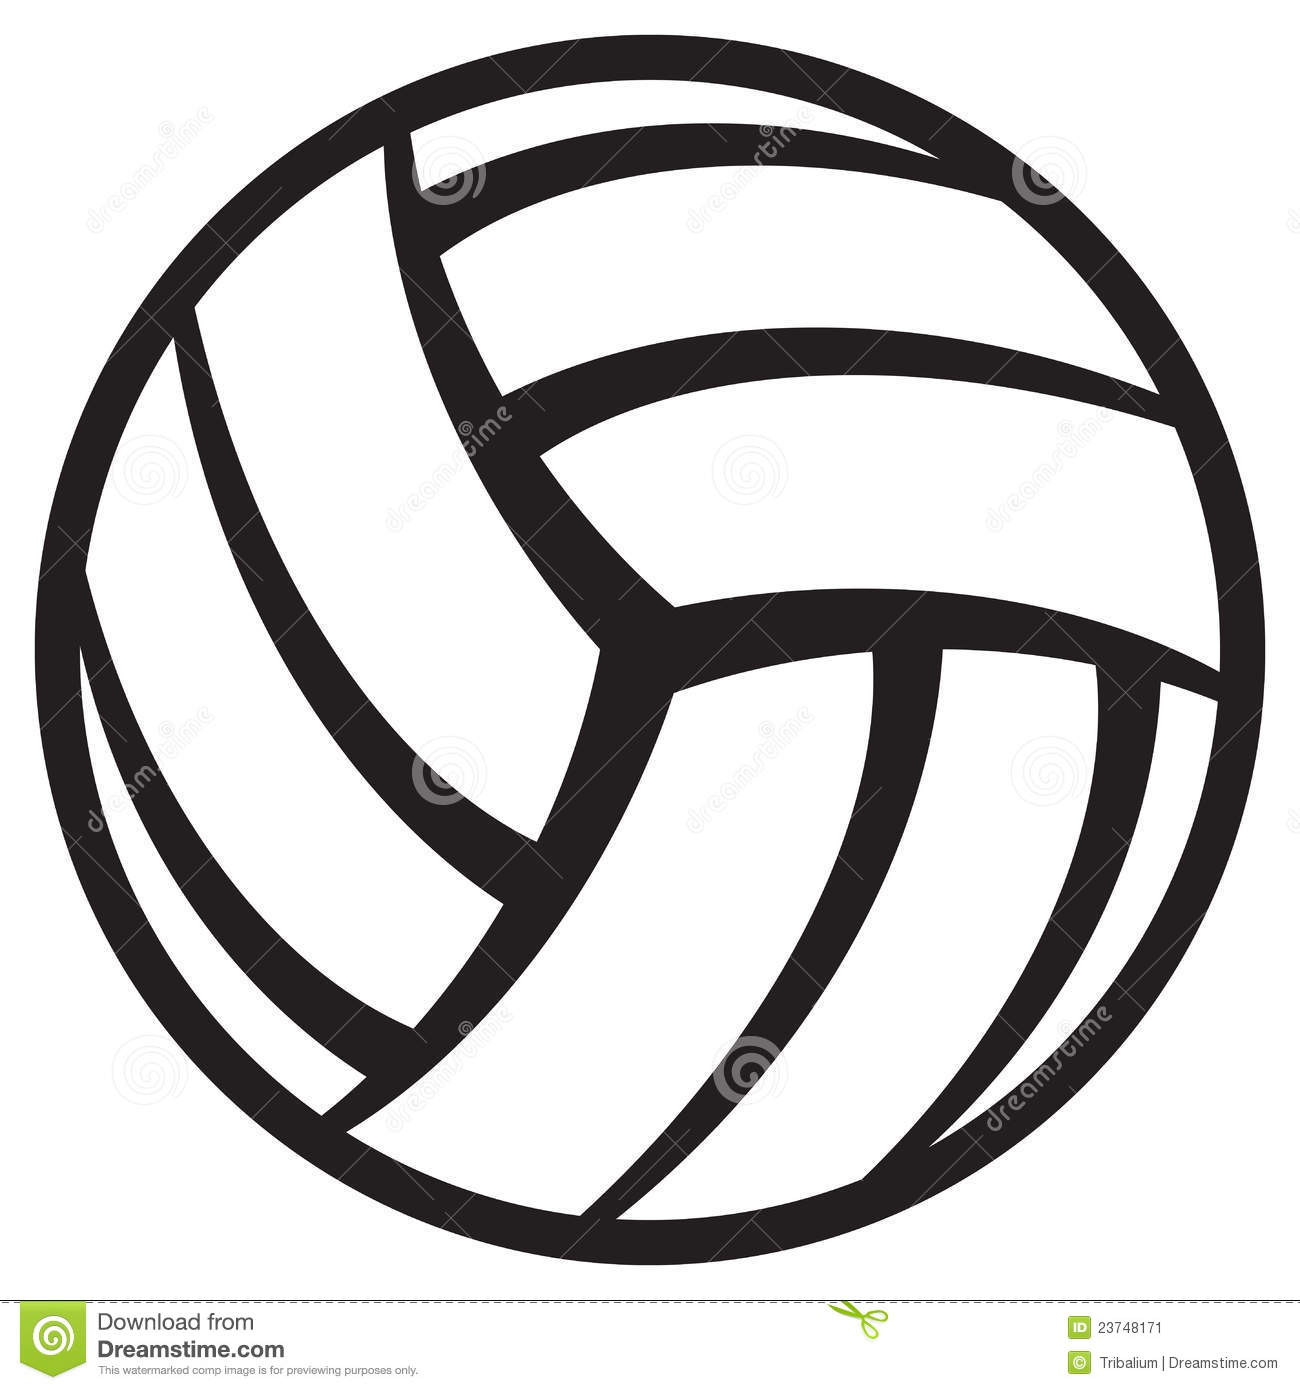 volleyball clipart free download - photo #3